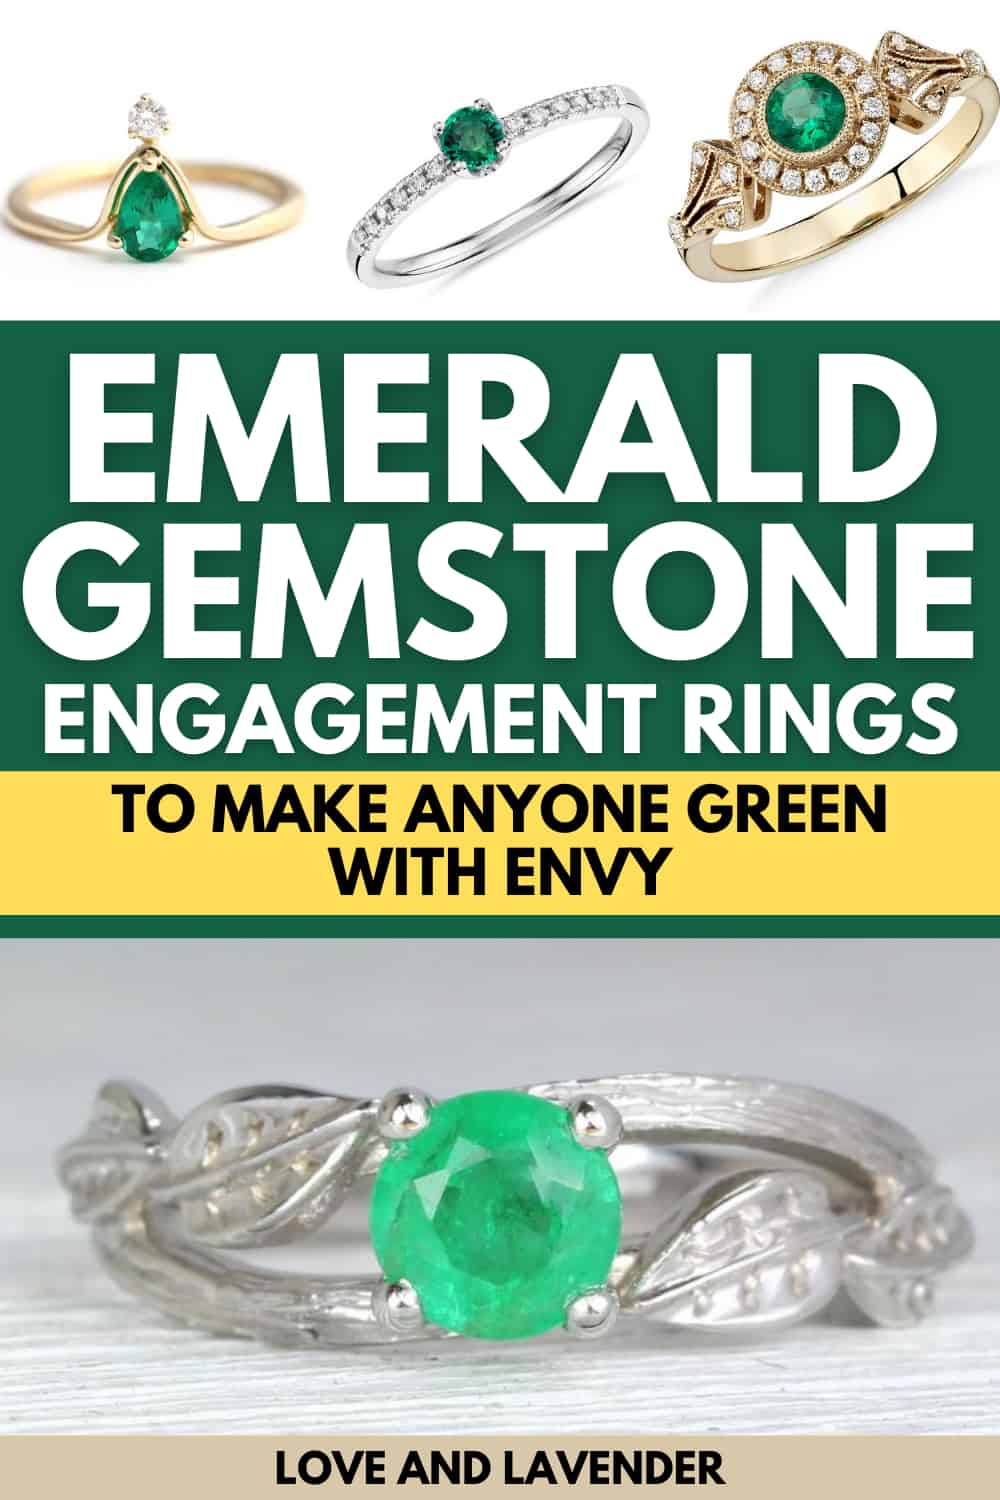 10 Emerald Gemstone Engagement Rings to Make Anyone Green with Envy ...